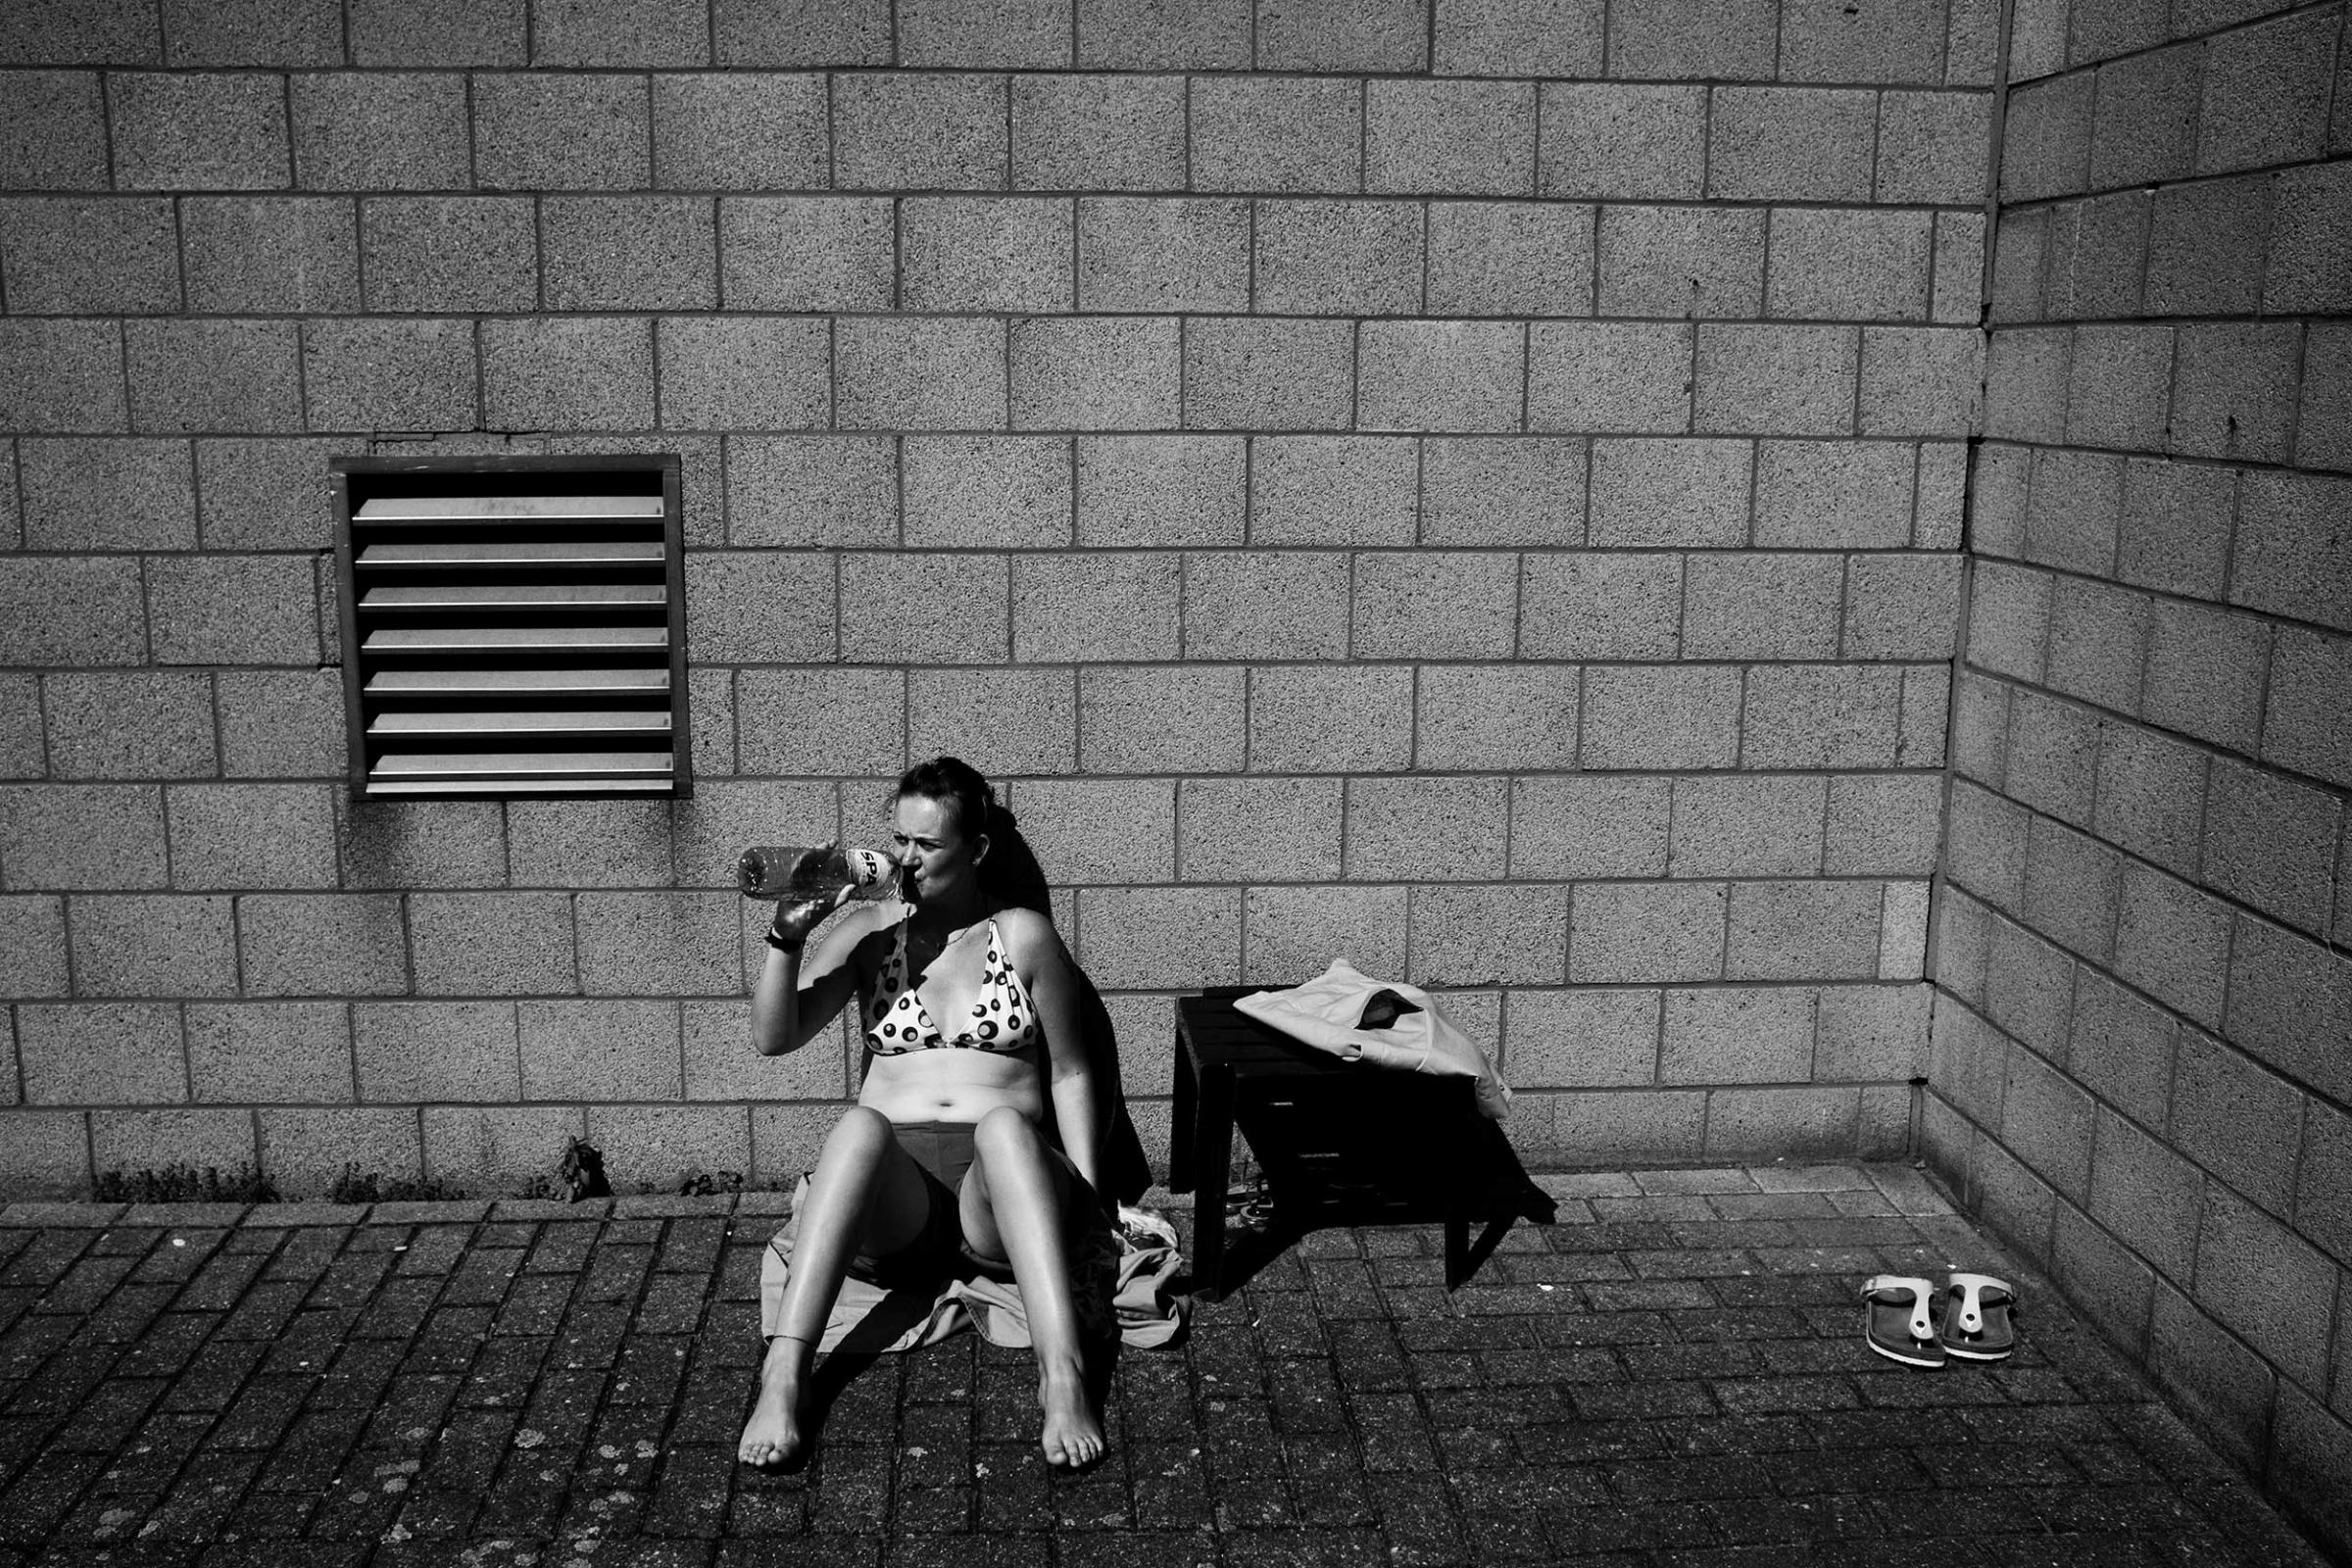 A female prisoner sunbathing at the women's prison in Berkendaele, Brussels. This courtyard is located next to a prison for men, whose cells offer a direct view on the women's courtyard. Some of the women enjoy mocking the men or exposing themselves to them. Brussels, Belgium. July 2011.